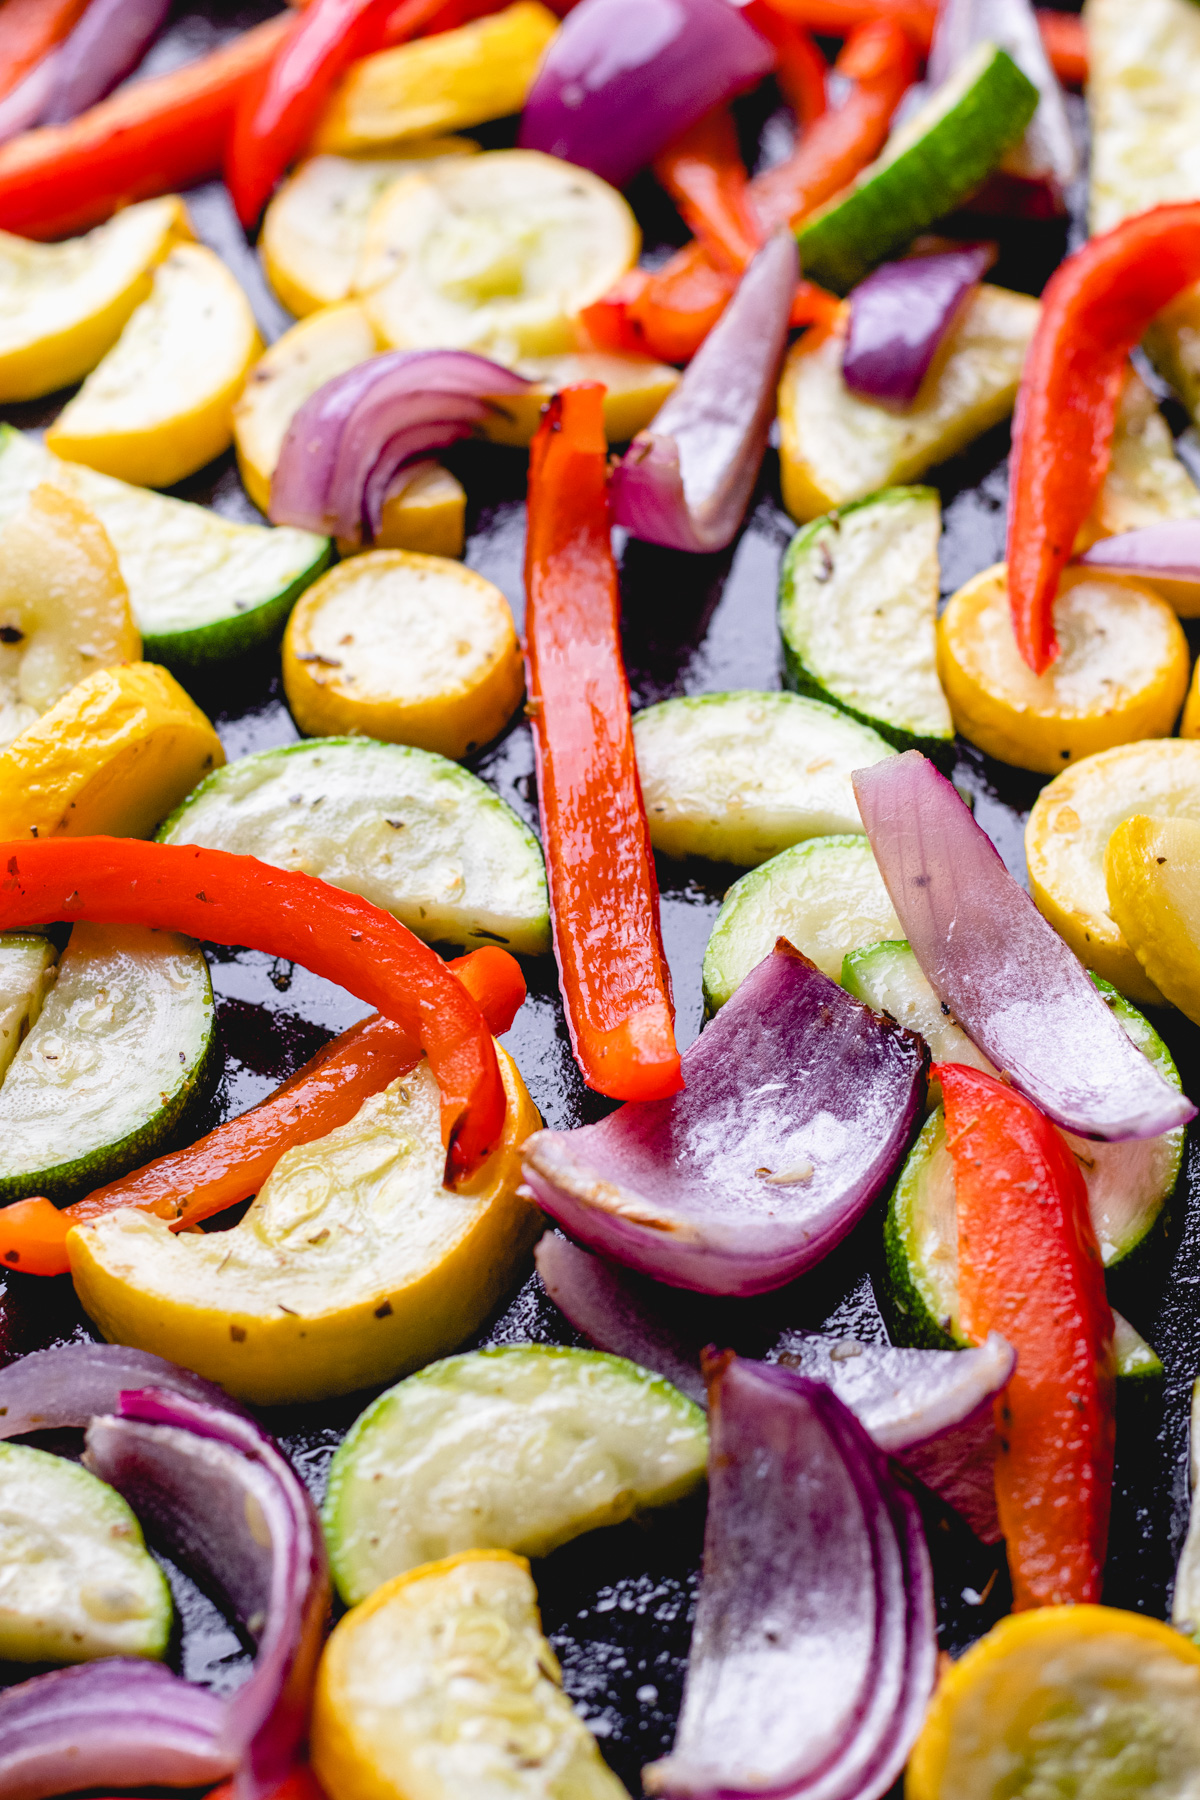 Roasted red bell pepper, red onion, zucchini, and yellow squash on a baking sheet.